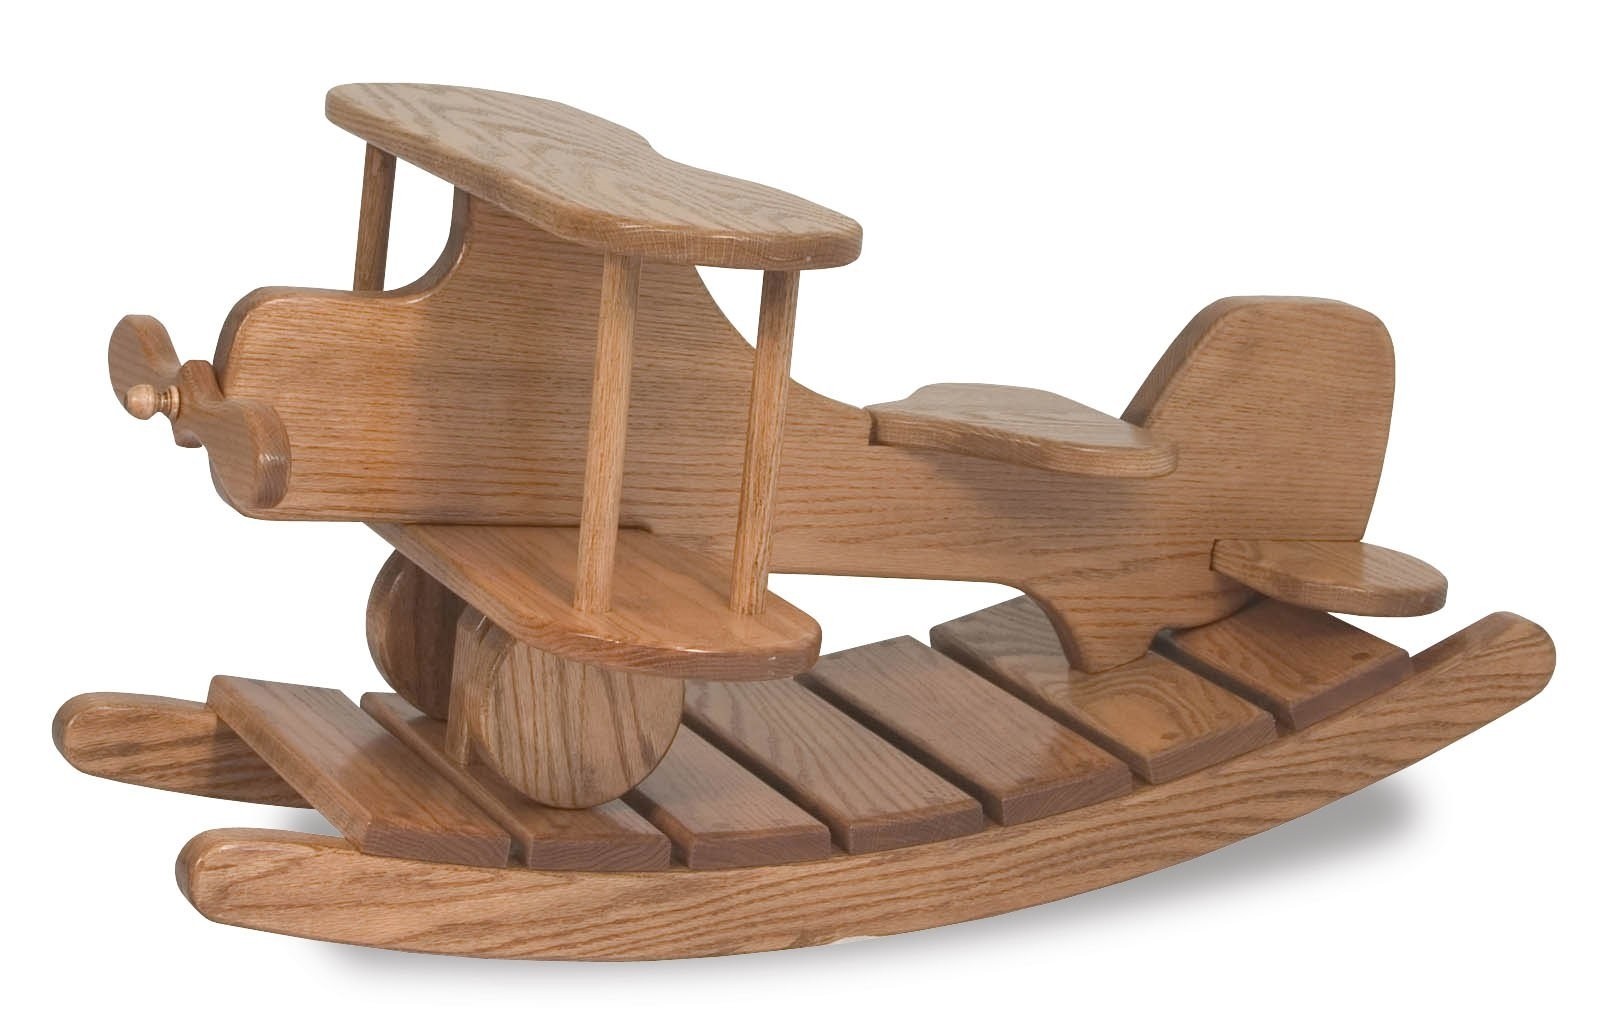 Wooden airplane rocker solid oak wood from dutchcrafters amish